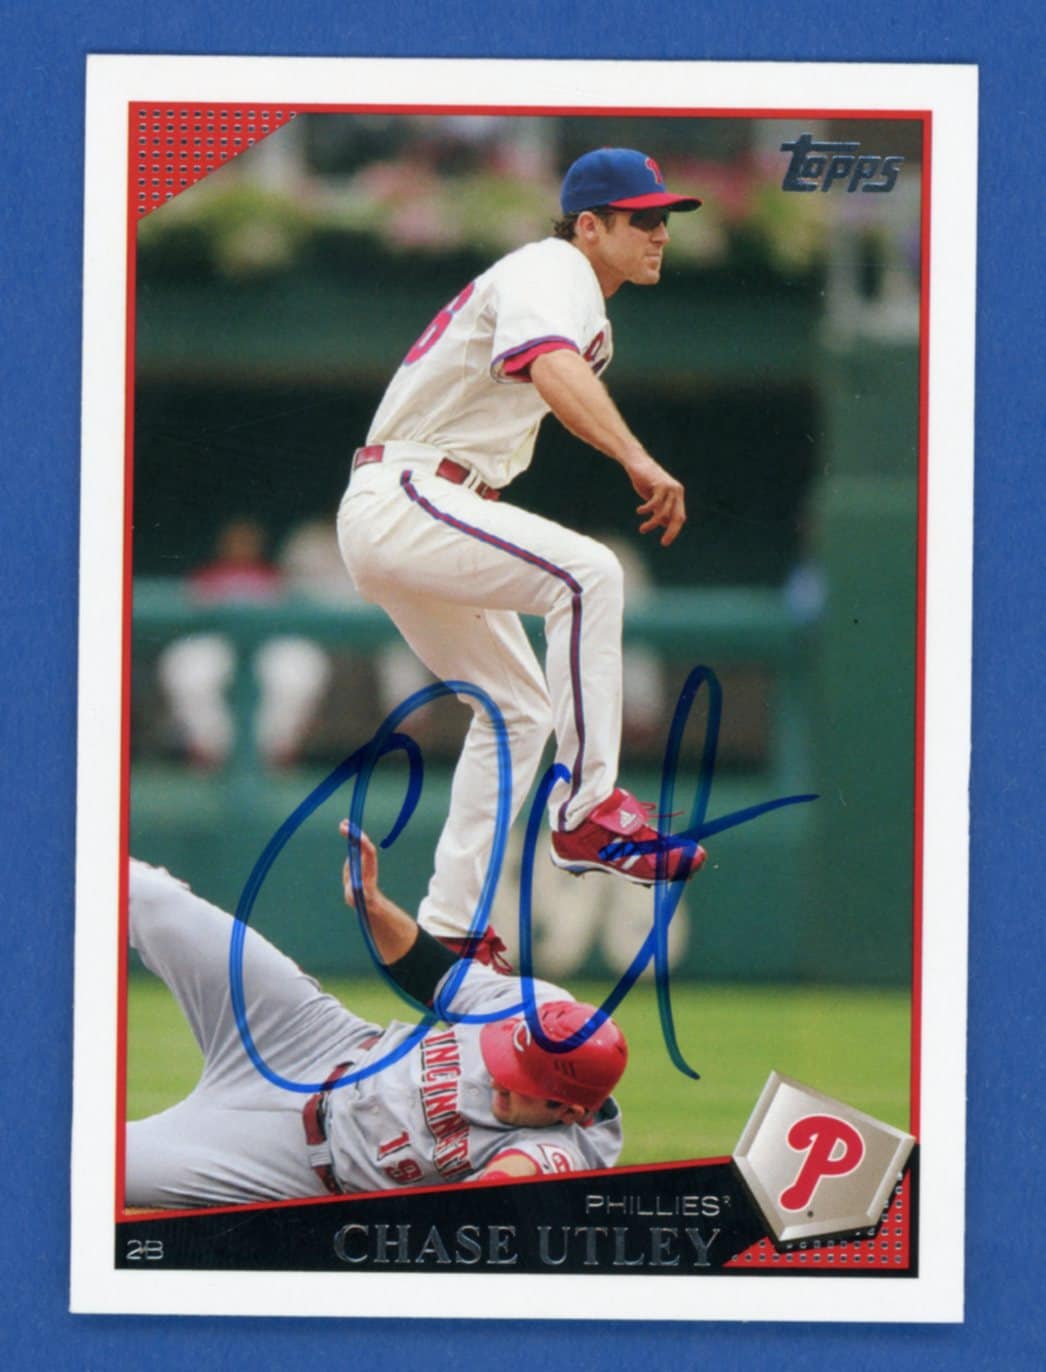 Chase Utley Autographed Memorabilia  Signed Photo, Jersey, Collectibles &  Merchandise